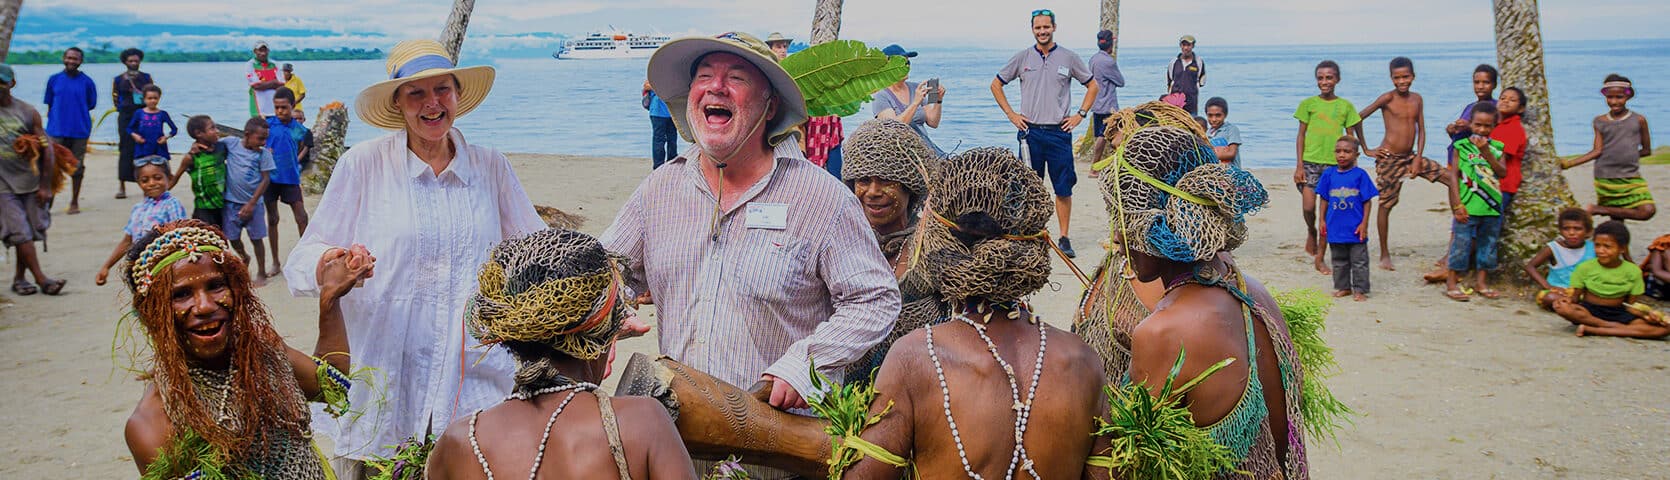 Expedition-Cruise-Papua-New-Guinea-&-Micronesia-Coral-Expeditions-Guest-Laughing